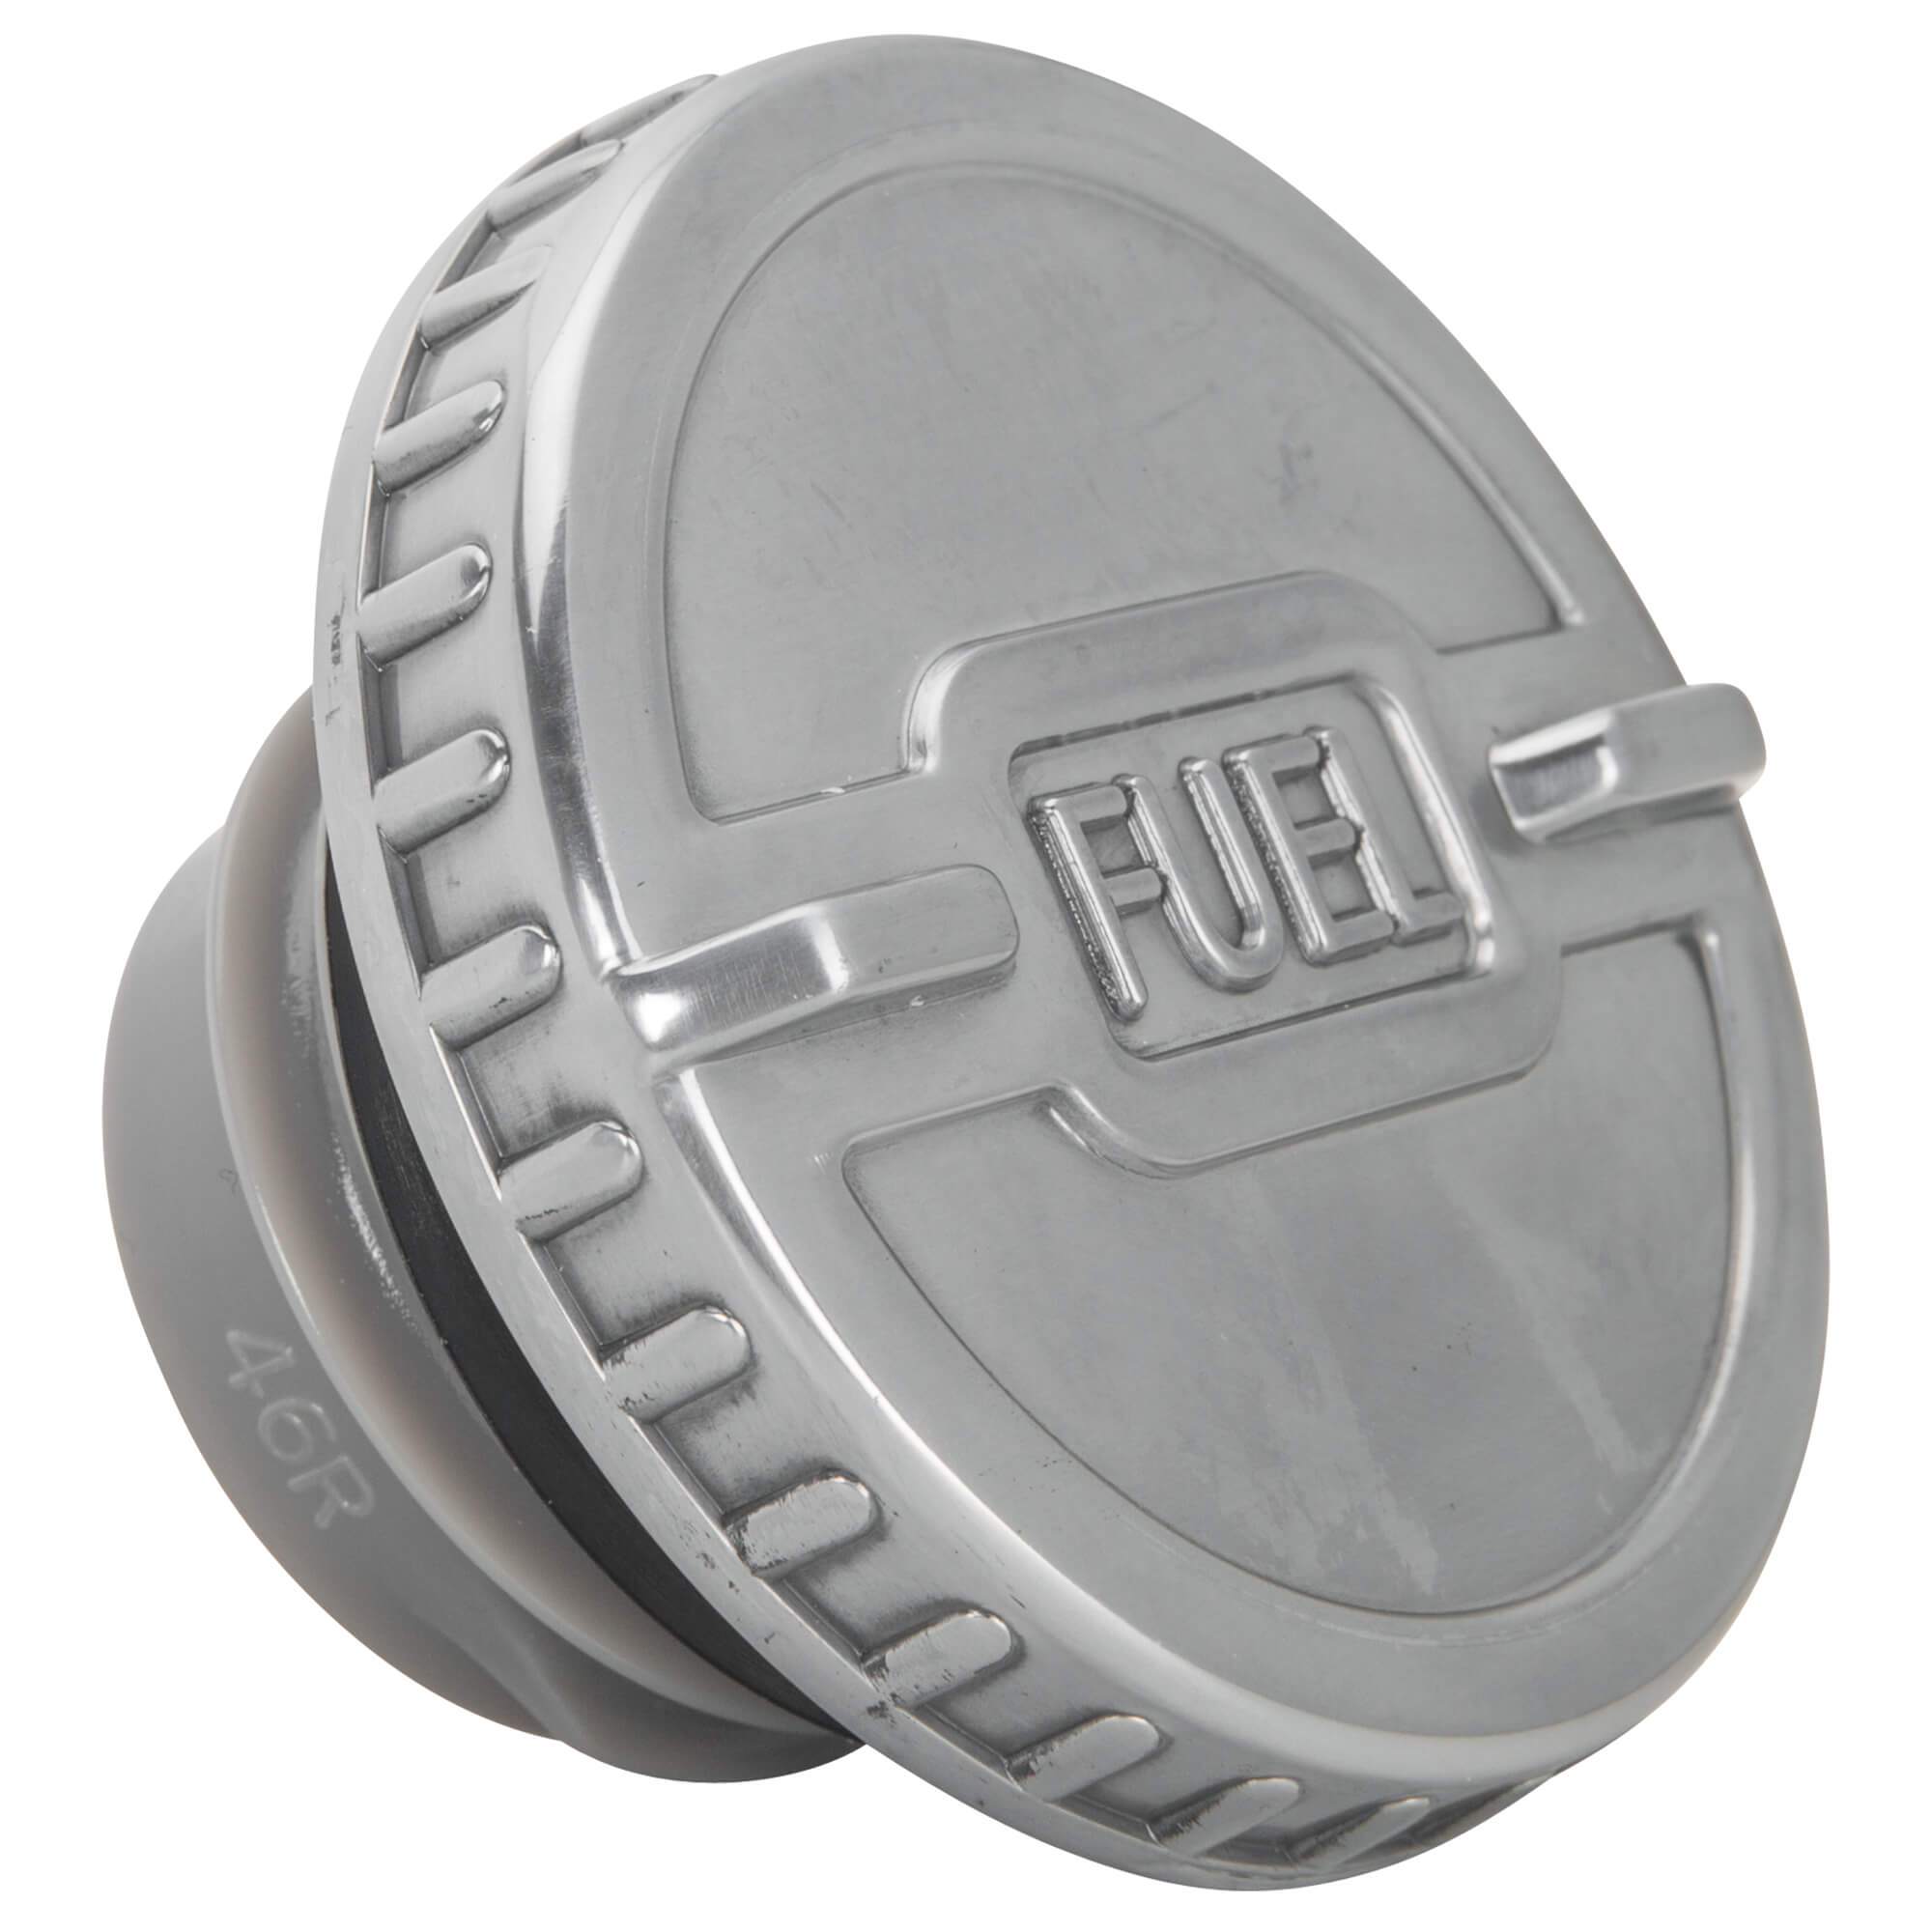 Lowbrow Customs Competition Screw-In Gas Cap for Harley-Davidson ...